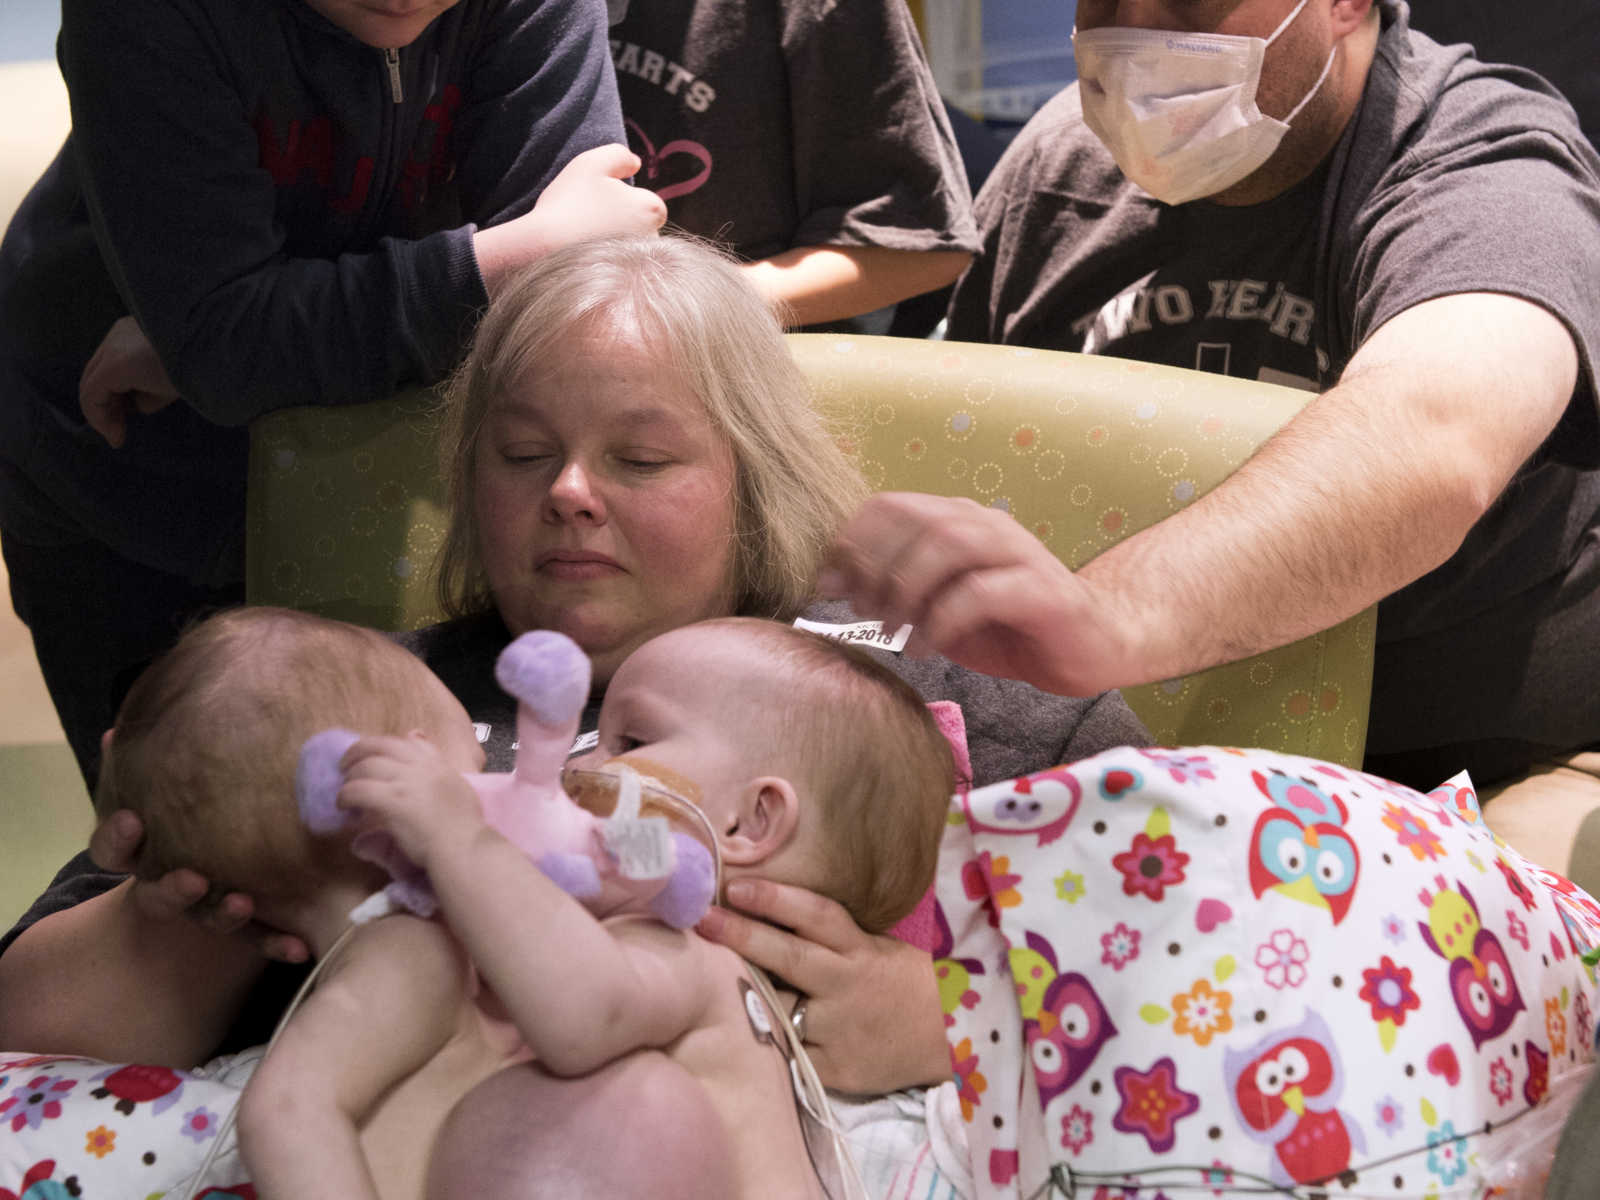 mother holding conjoined twins in lap while man with mask reaches over her shoulder to touch twins next to two others